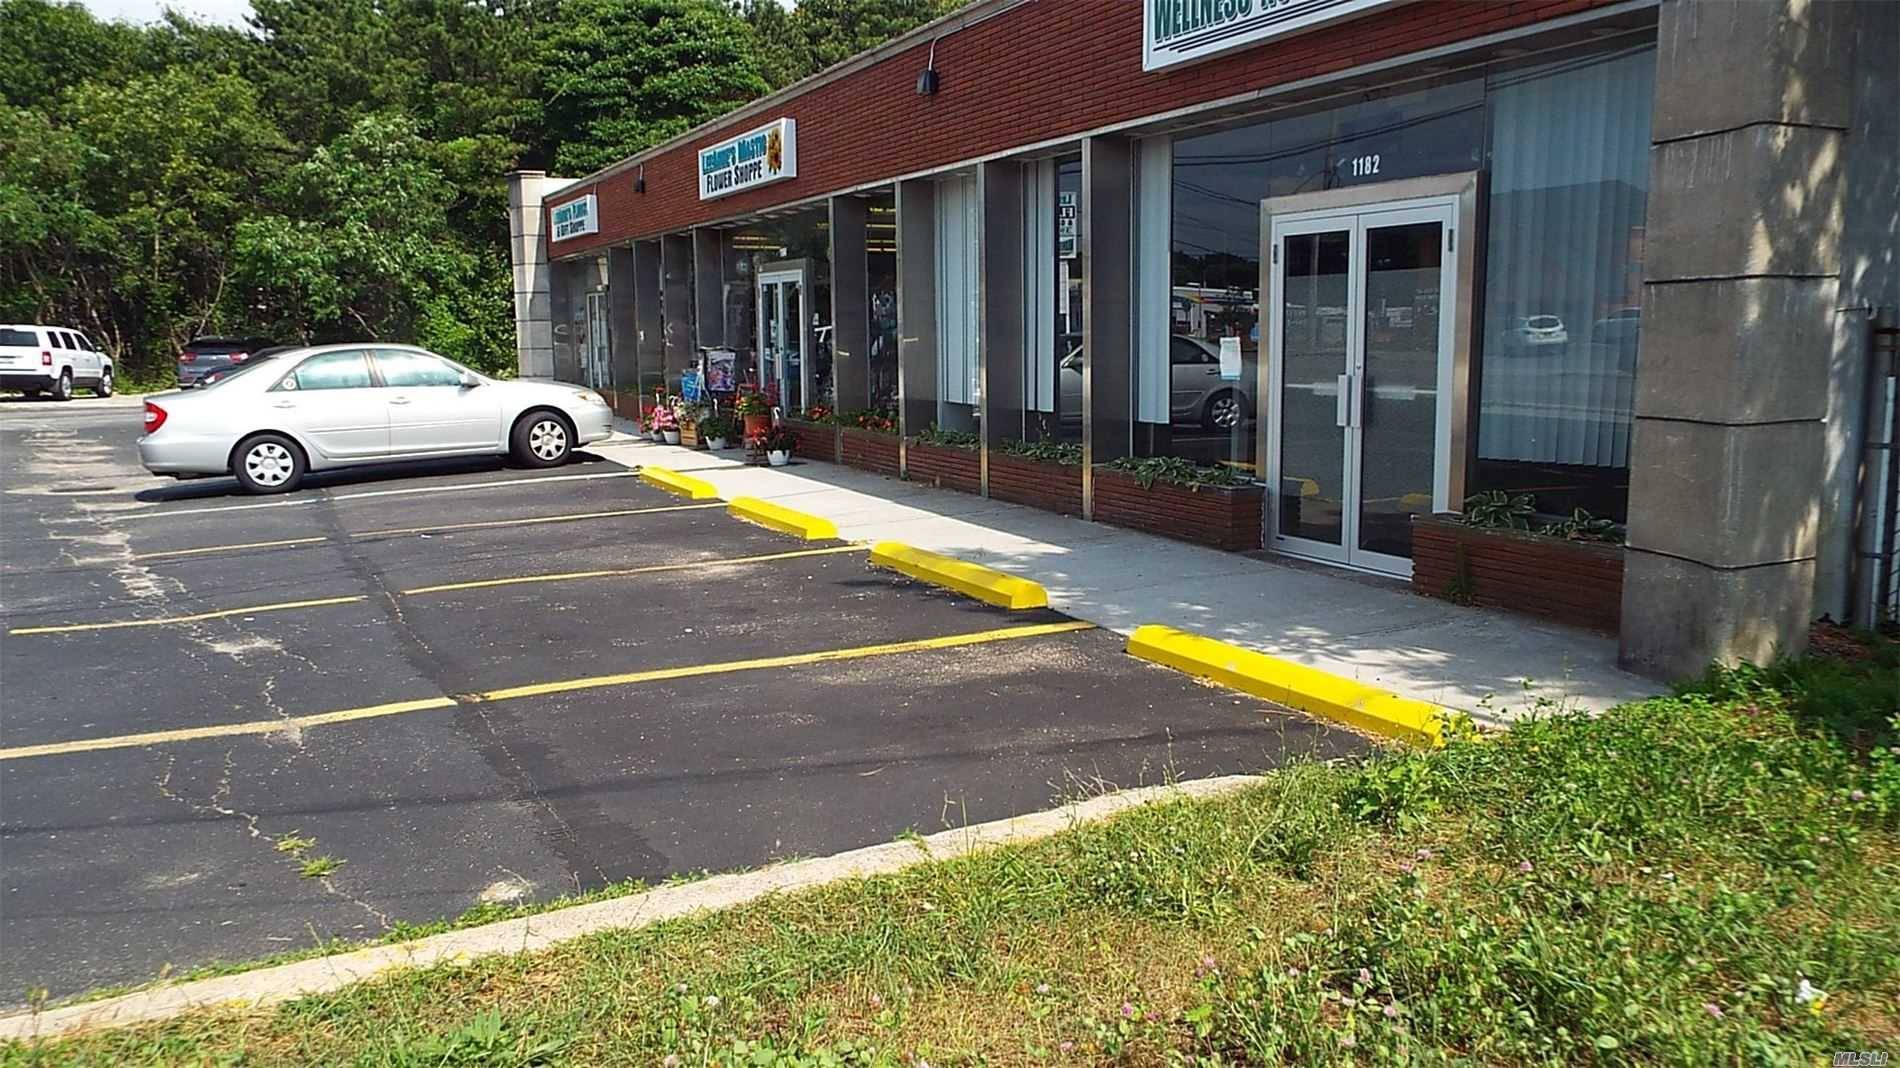 125 FT Road Frontage x 264 Deep on Montauk Hwy Building 3000 SQ FT Yard Space Current Real Estate Tax 16853.